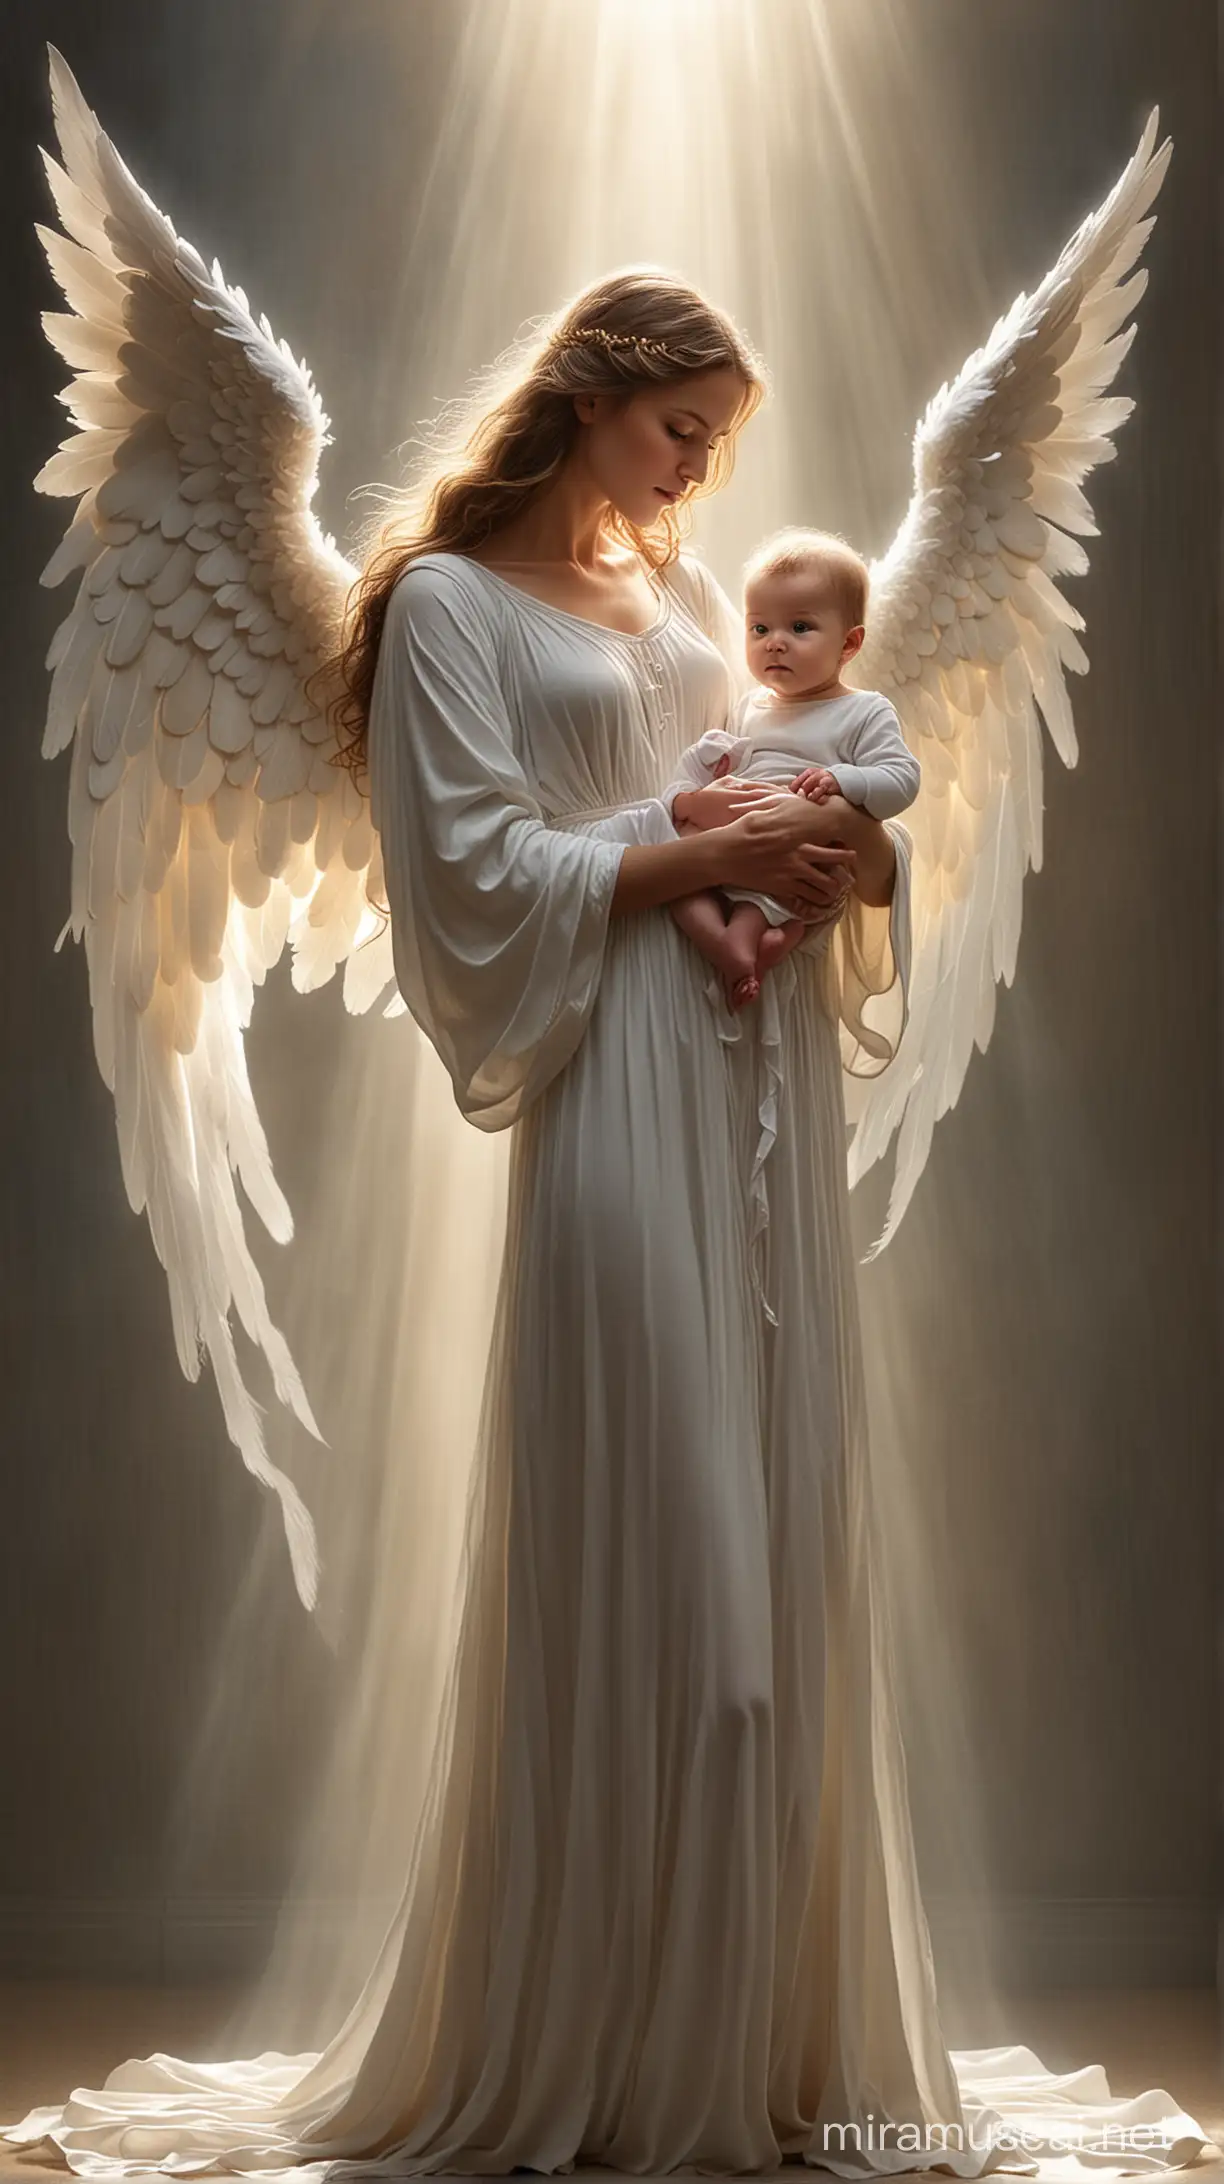 The angel of love stands firmly beside the baby, with light shining from her hands, sheltering and protecting from the darkness.